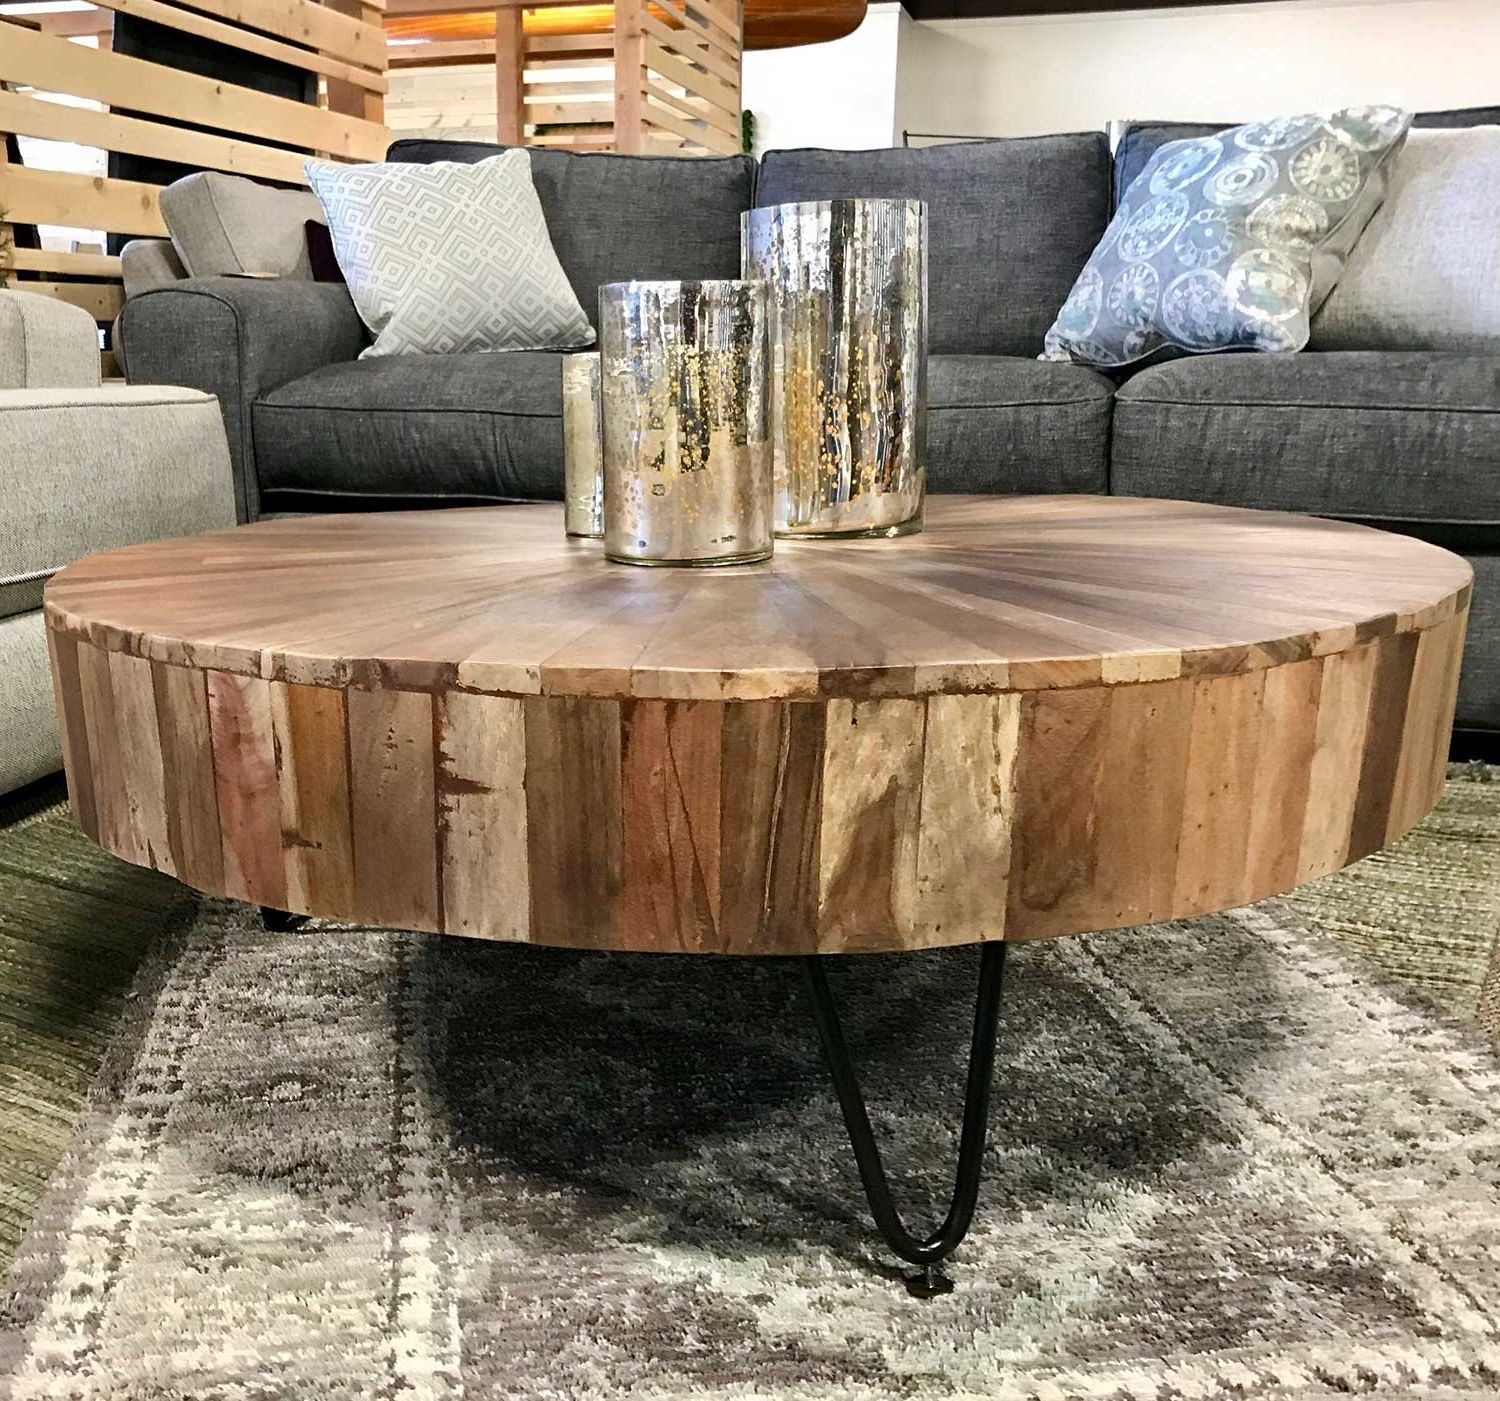 Furniture Outfitters – Reclaimed Wood Coffee Table Inside 2020 Smoked Barnwood Cocktail Tables (View 5 of 10)